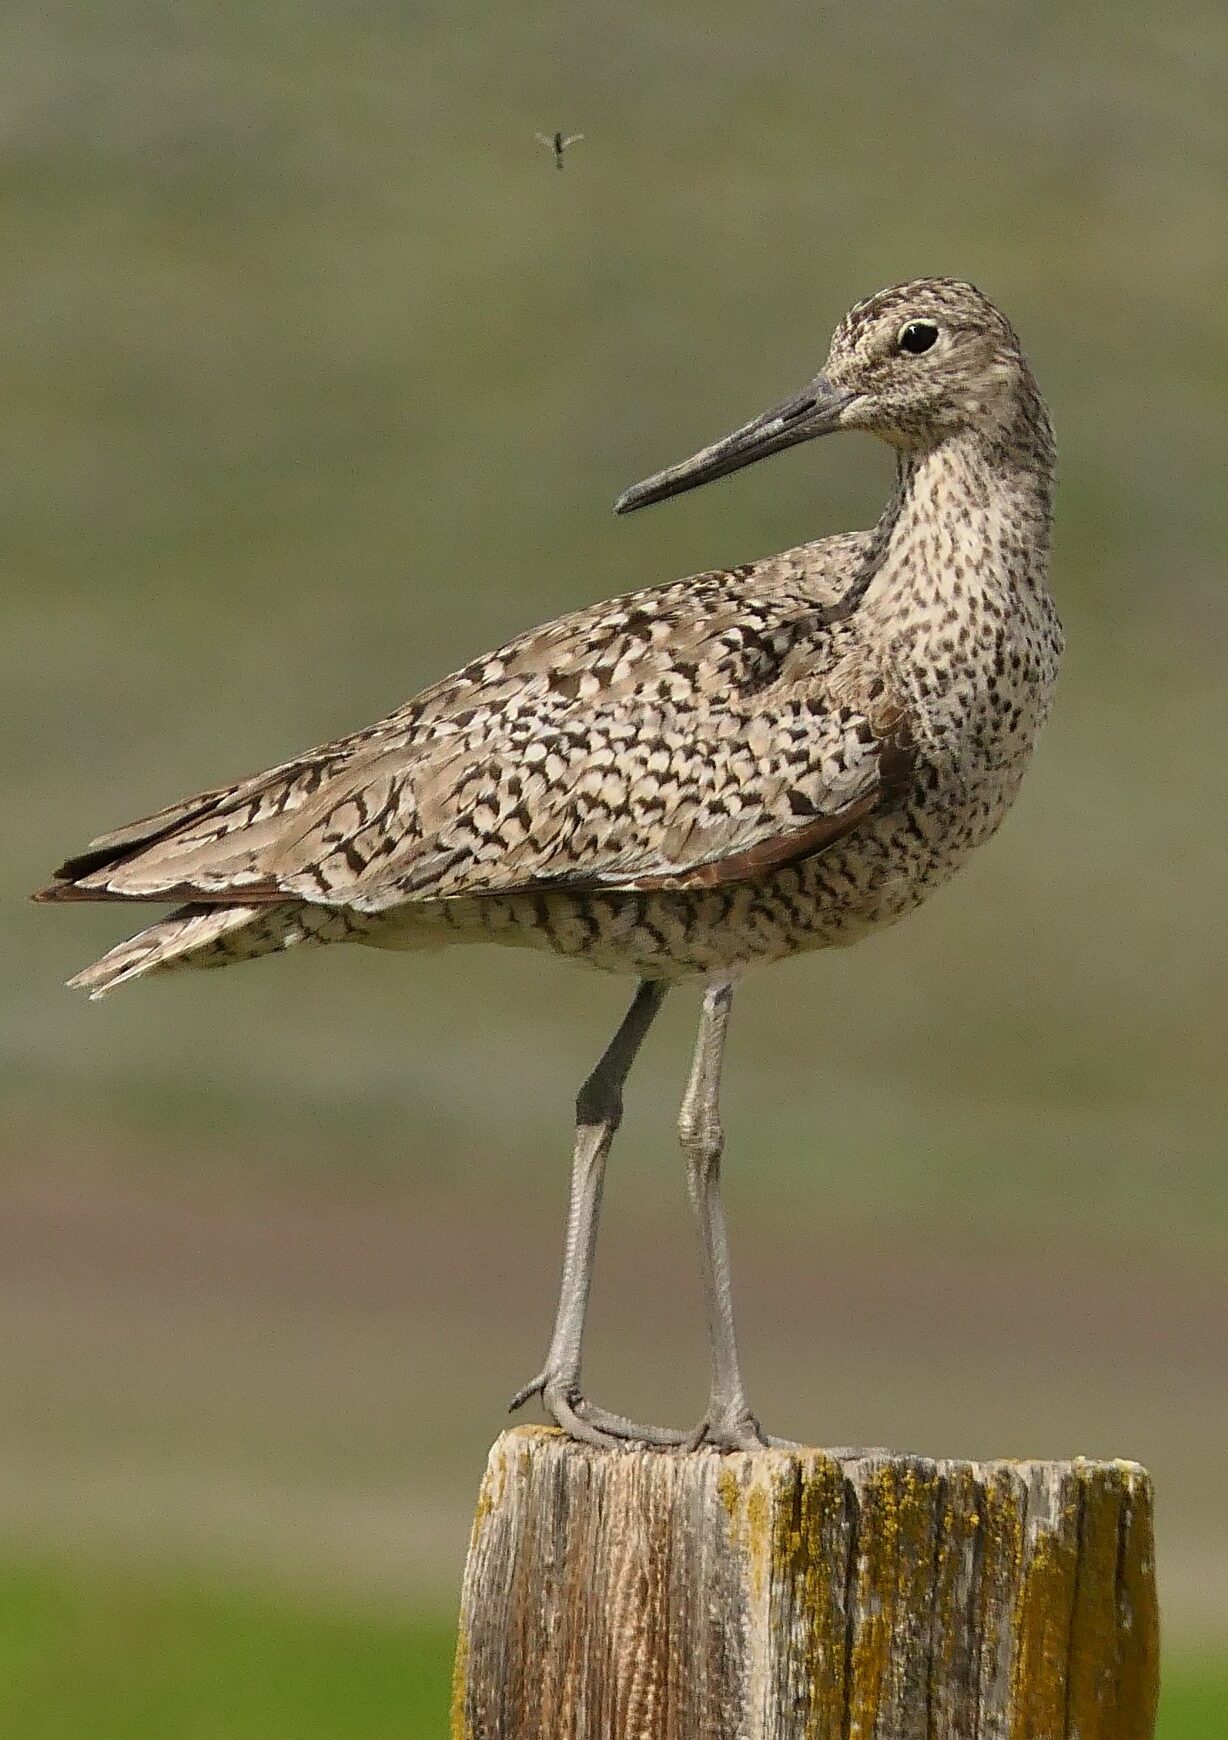 A Willet. This is a shorebird with brown flecked feathers, long legs, and medium-length bill. It is perched on a wooden fence post